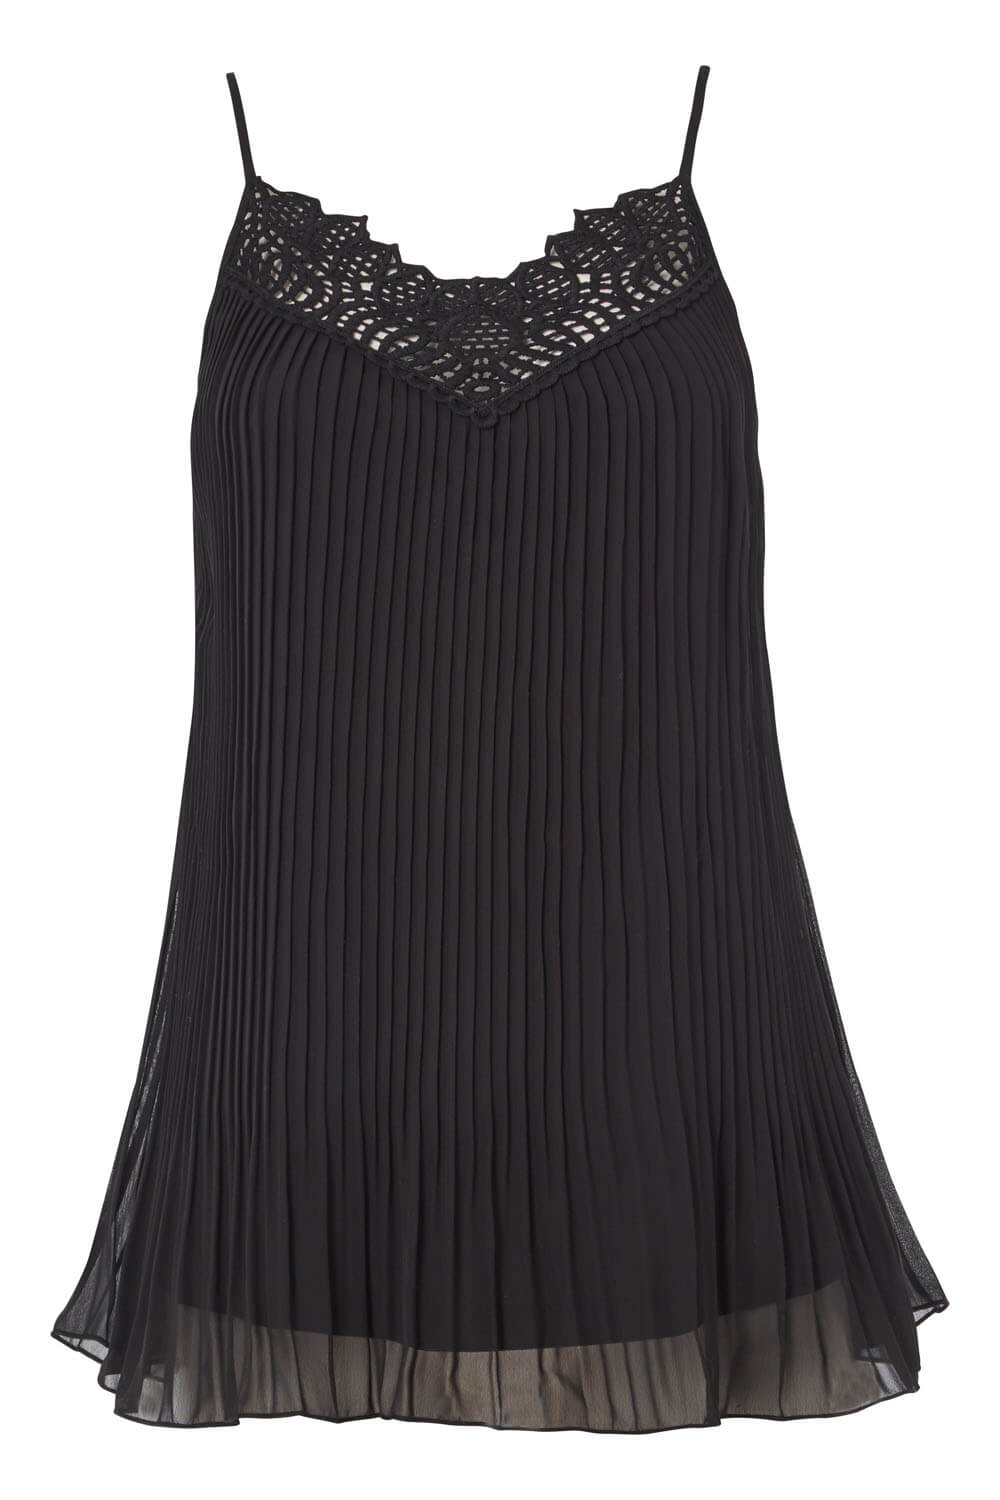 Black Pleated Lace Trim Cami Top, Image 5 of 6